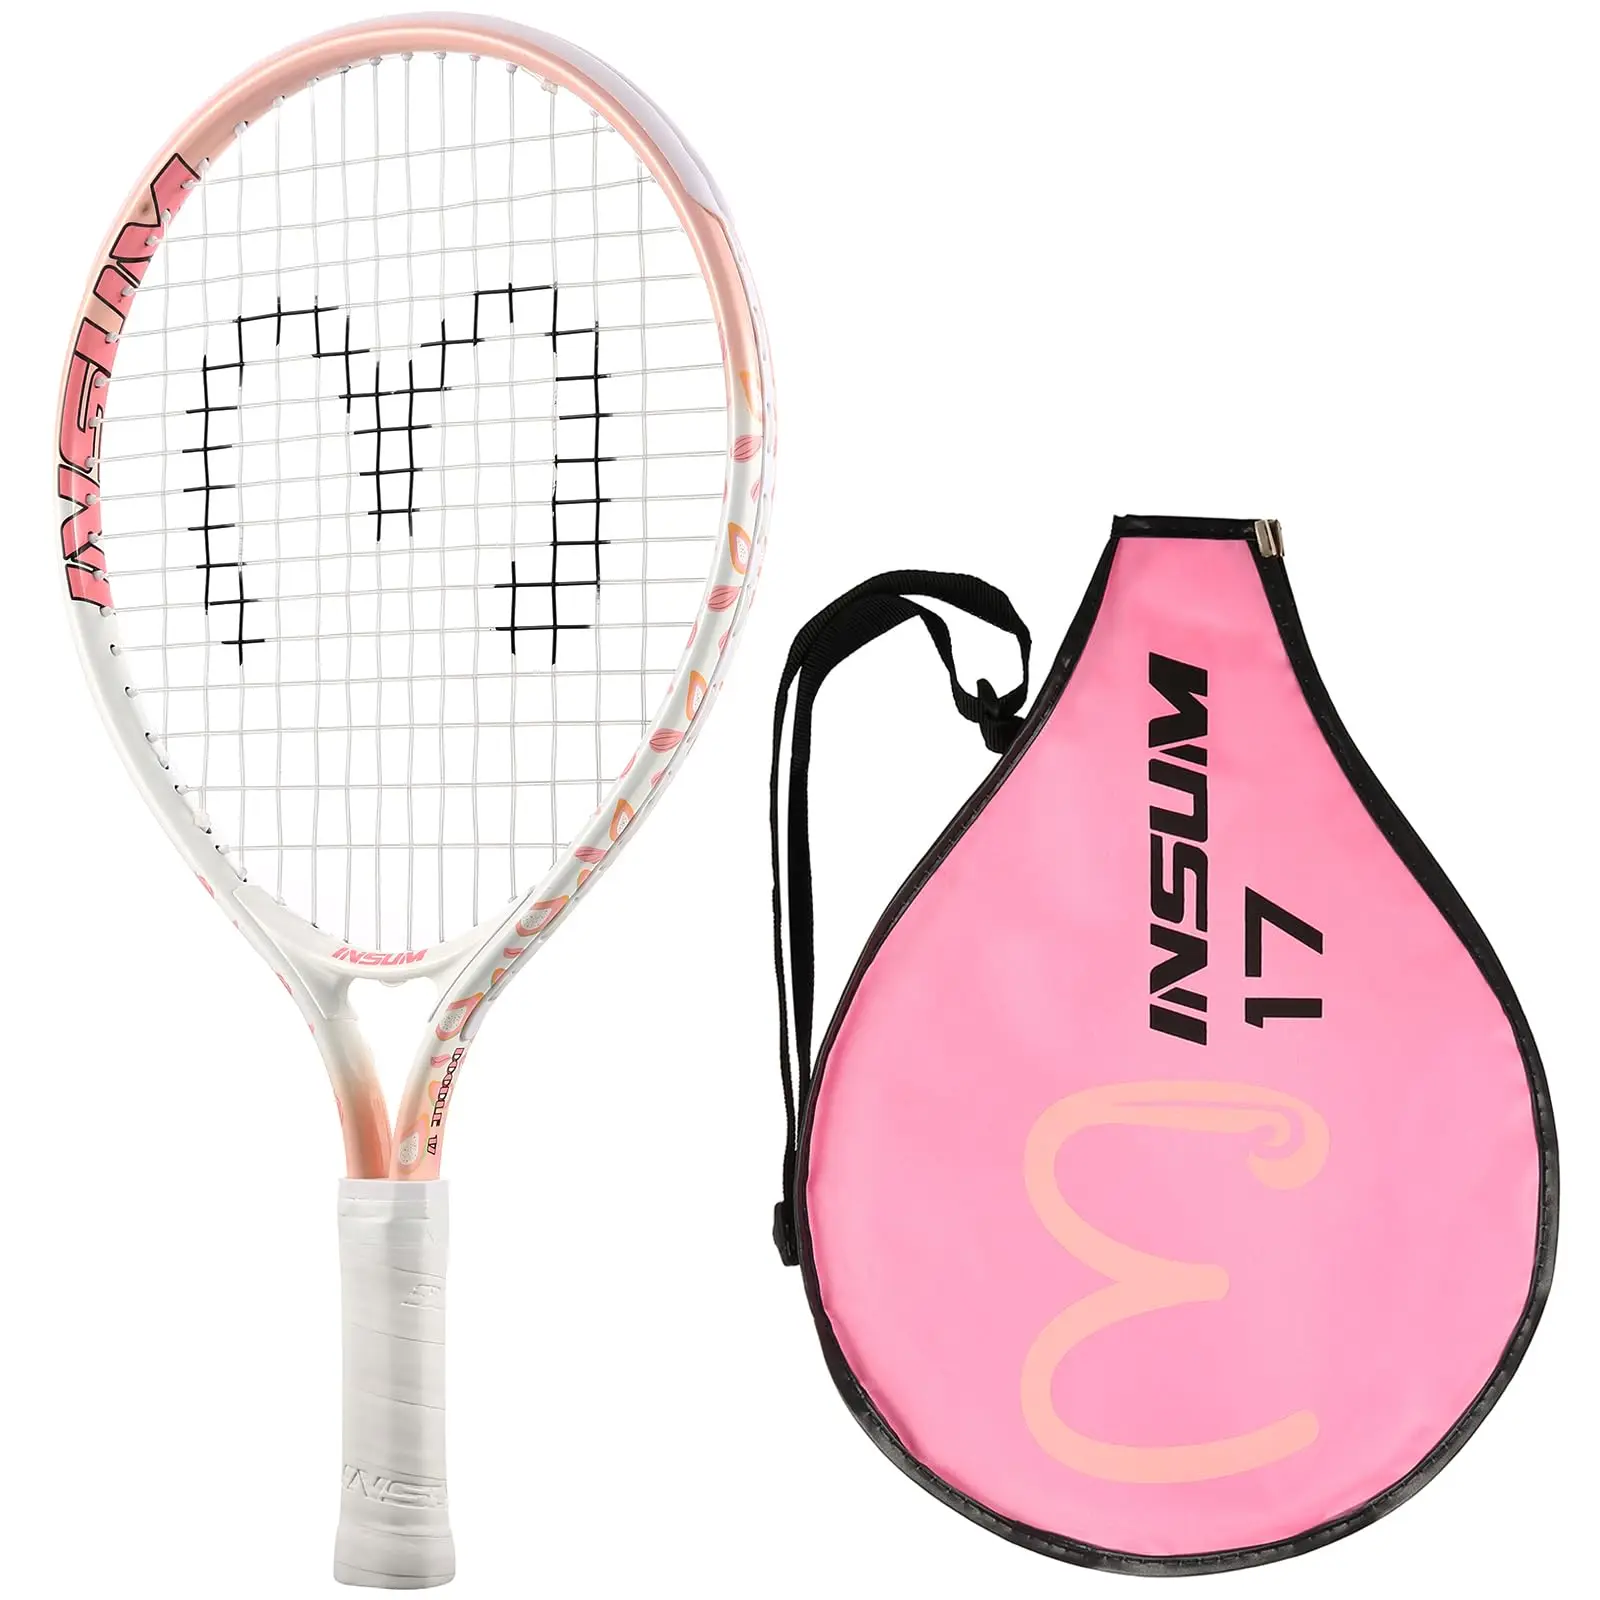 

INSUM Junior Tennis Racket for Kids Aged 2-4 Y with Cover Bag Tennis Racquet 17 Inches